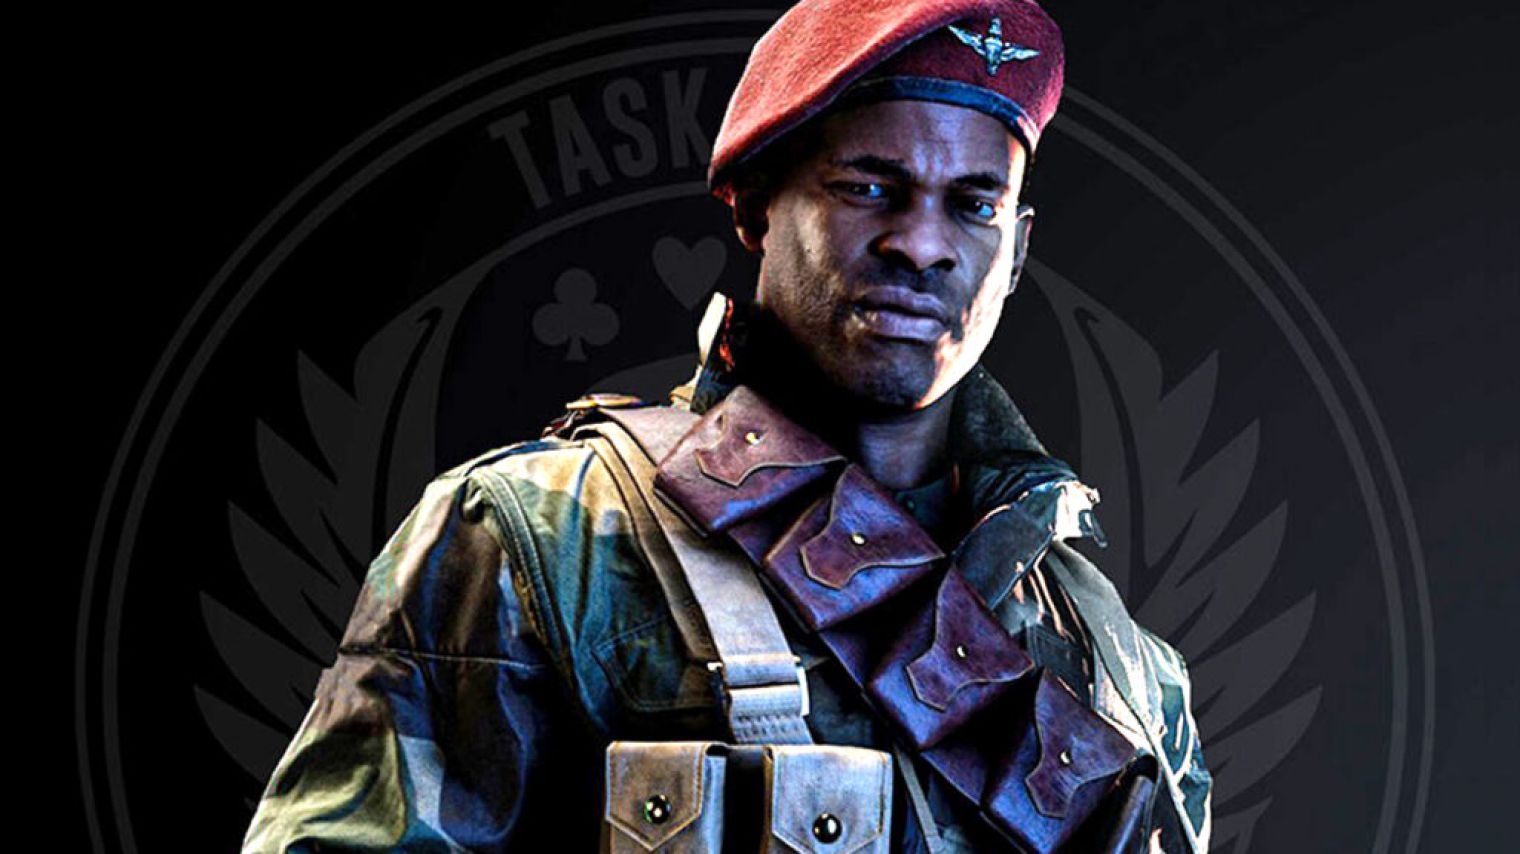 The award winning Call of Duty game series returns with Call of Duty: Vanguard. Lead soldier voiced and played by Chiké Okonkwo